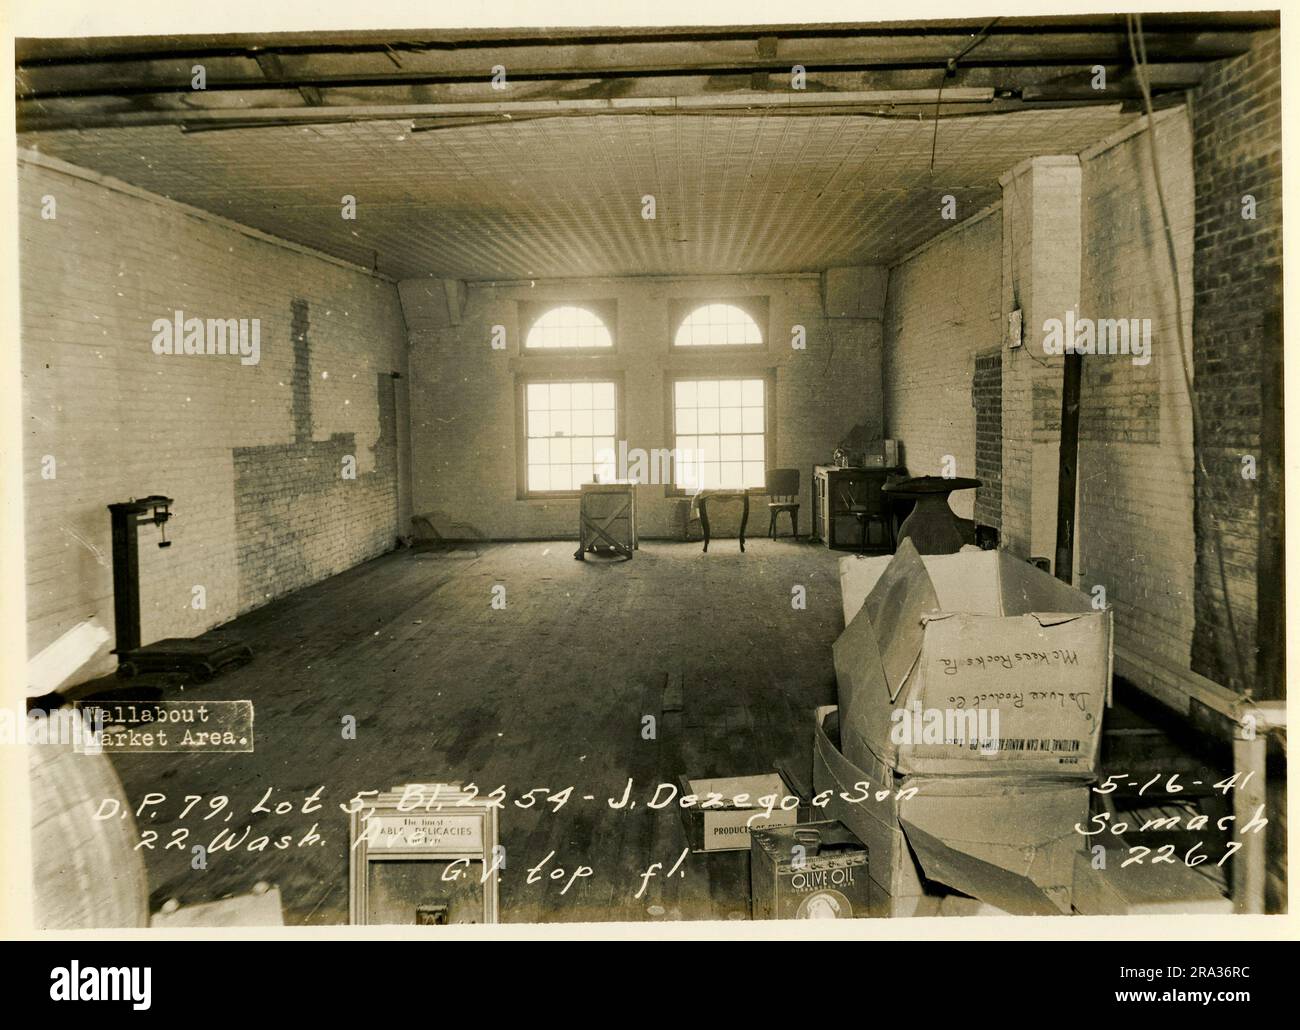 Photograph of interior Wallabout Market, D.P. 79, Lot 5, Bl. 2254, 22 Wash. Ave. J. Dezego & Son G.V. top fl.. Room view of vacated floor with 2 front windows from negative 2267.. Stock Photo